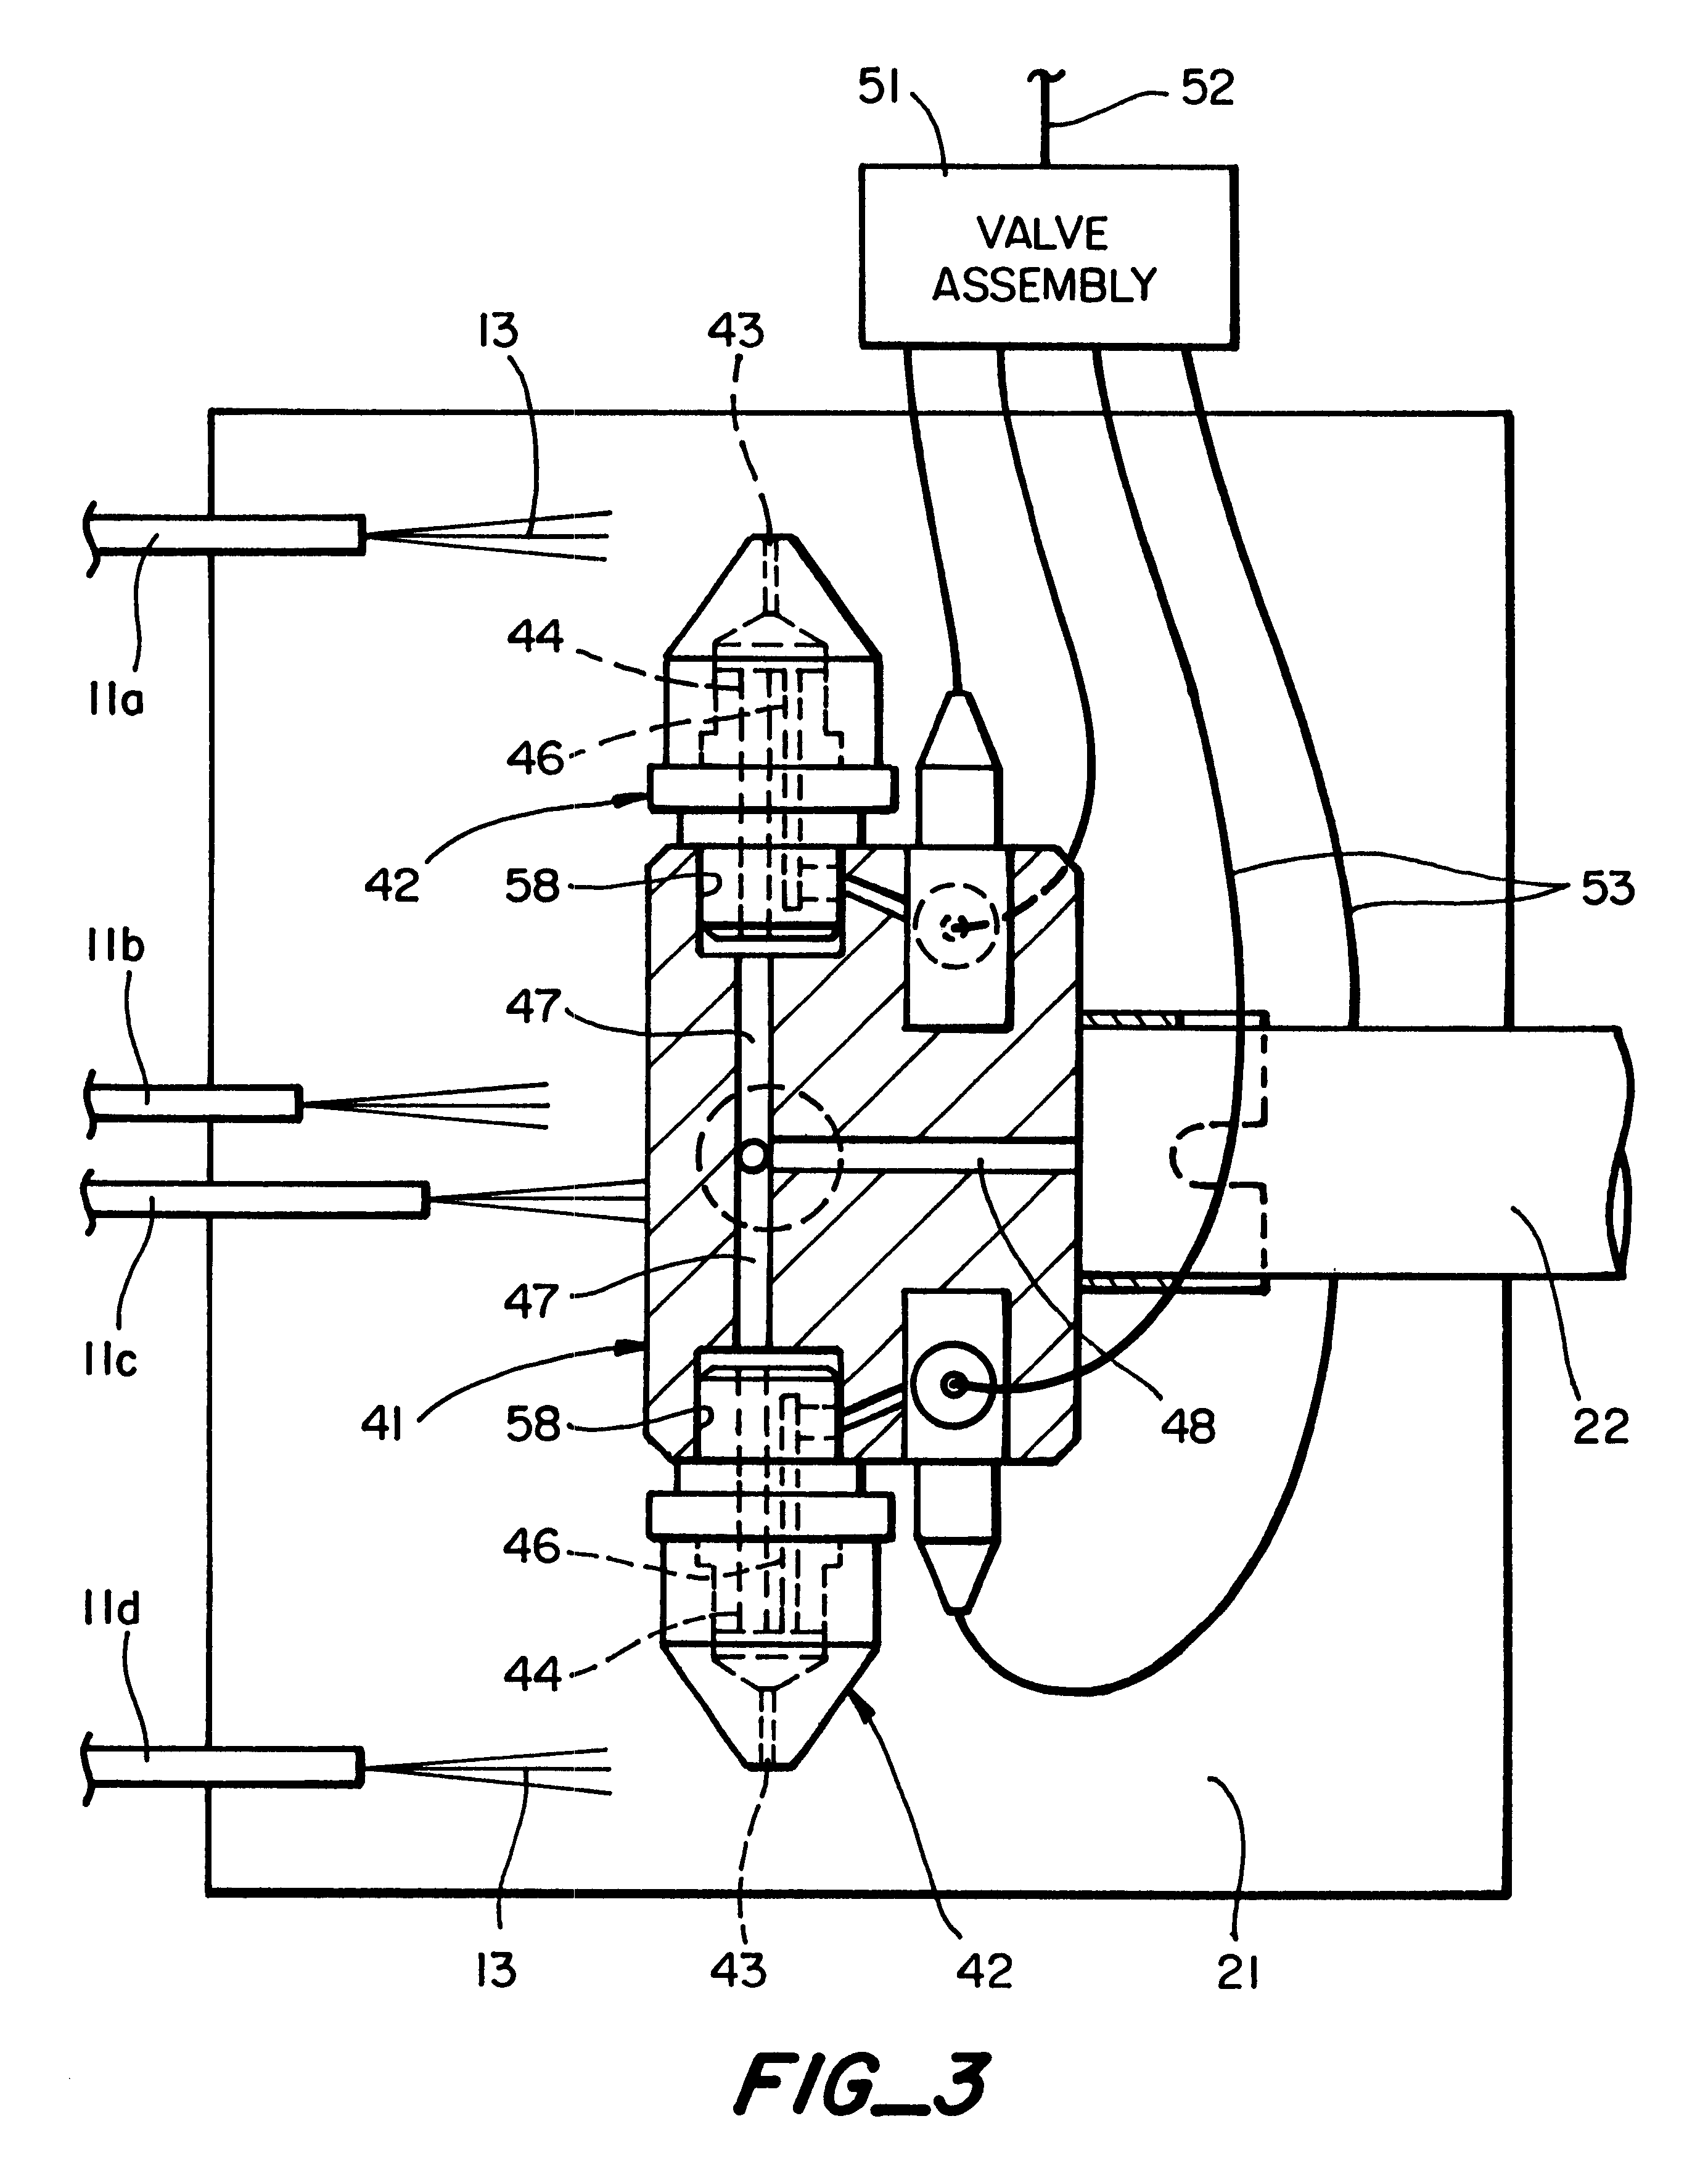 Mass spectrometer with a plurality of ionization probes